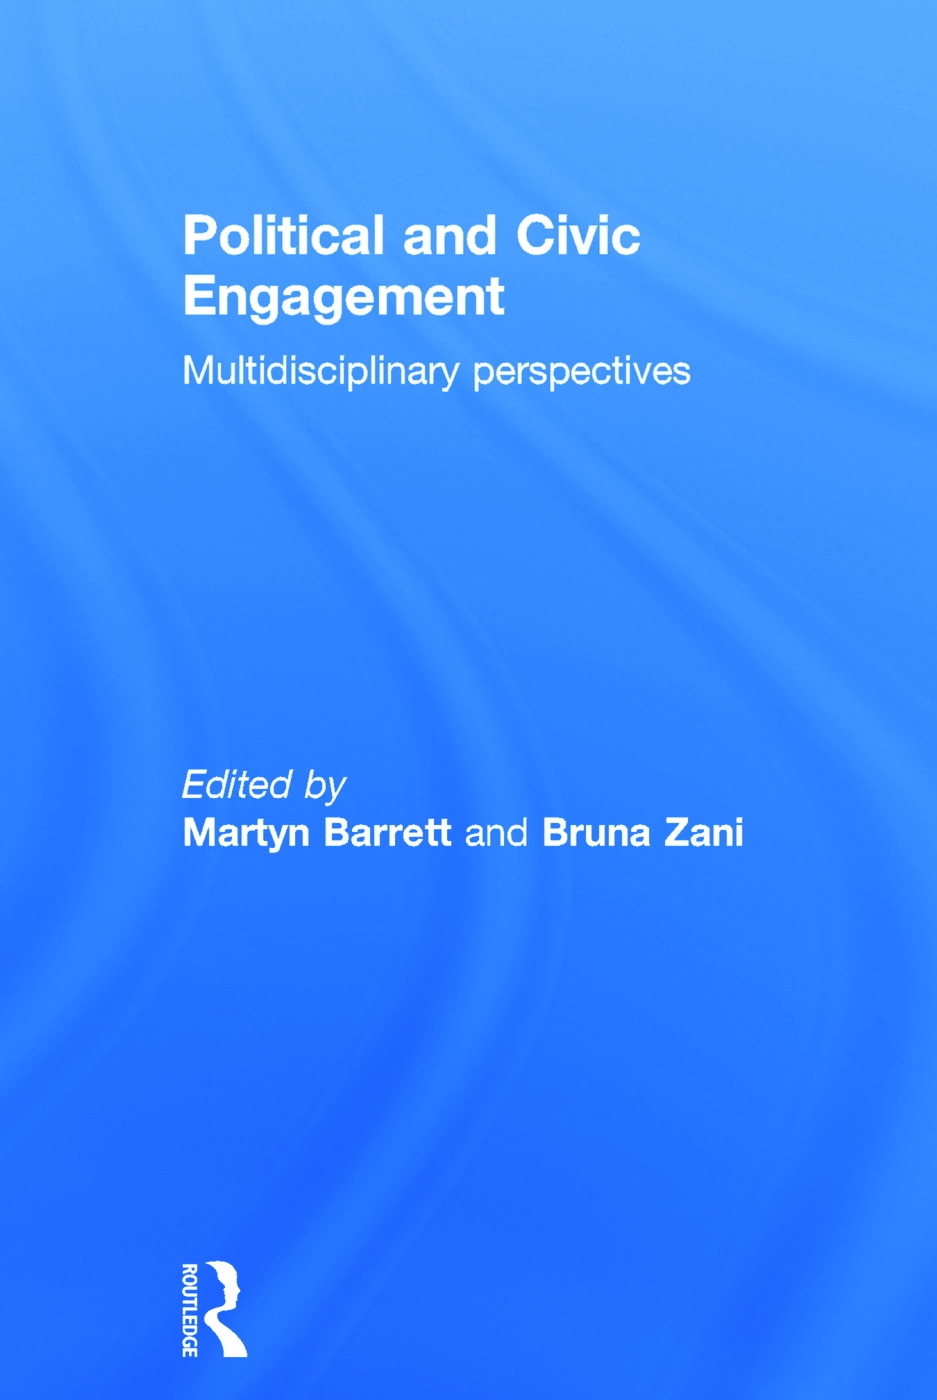 Political and Civic Engagement: Multidisciplinary Perspectives